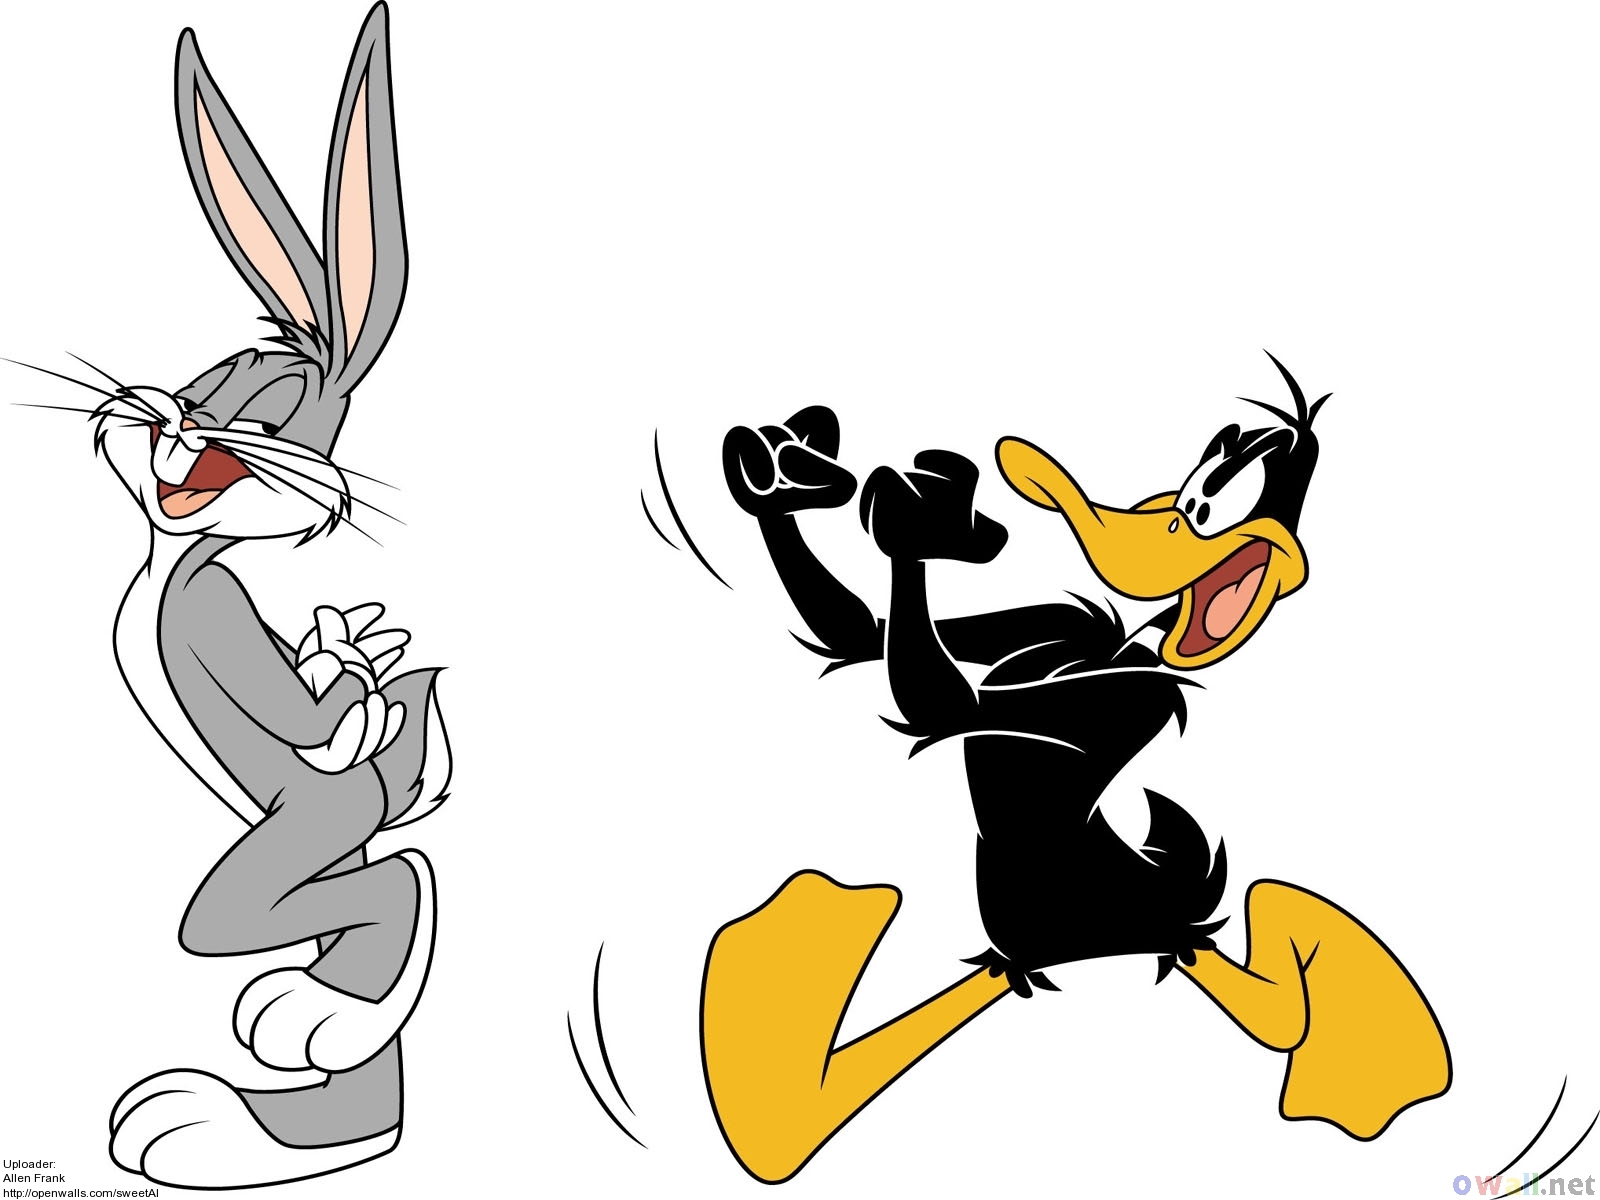 daffy, Looney, Toons, Bugs, Bunny Wallpaper